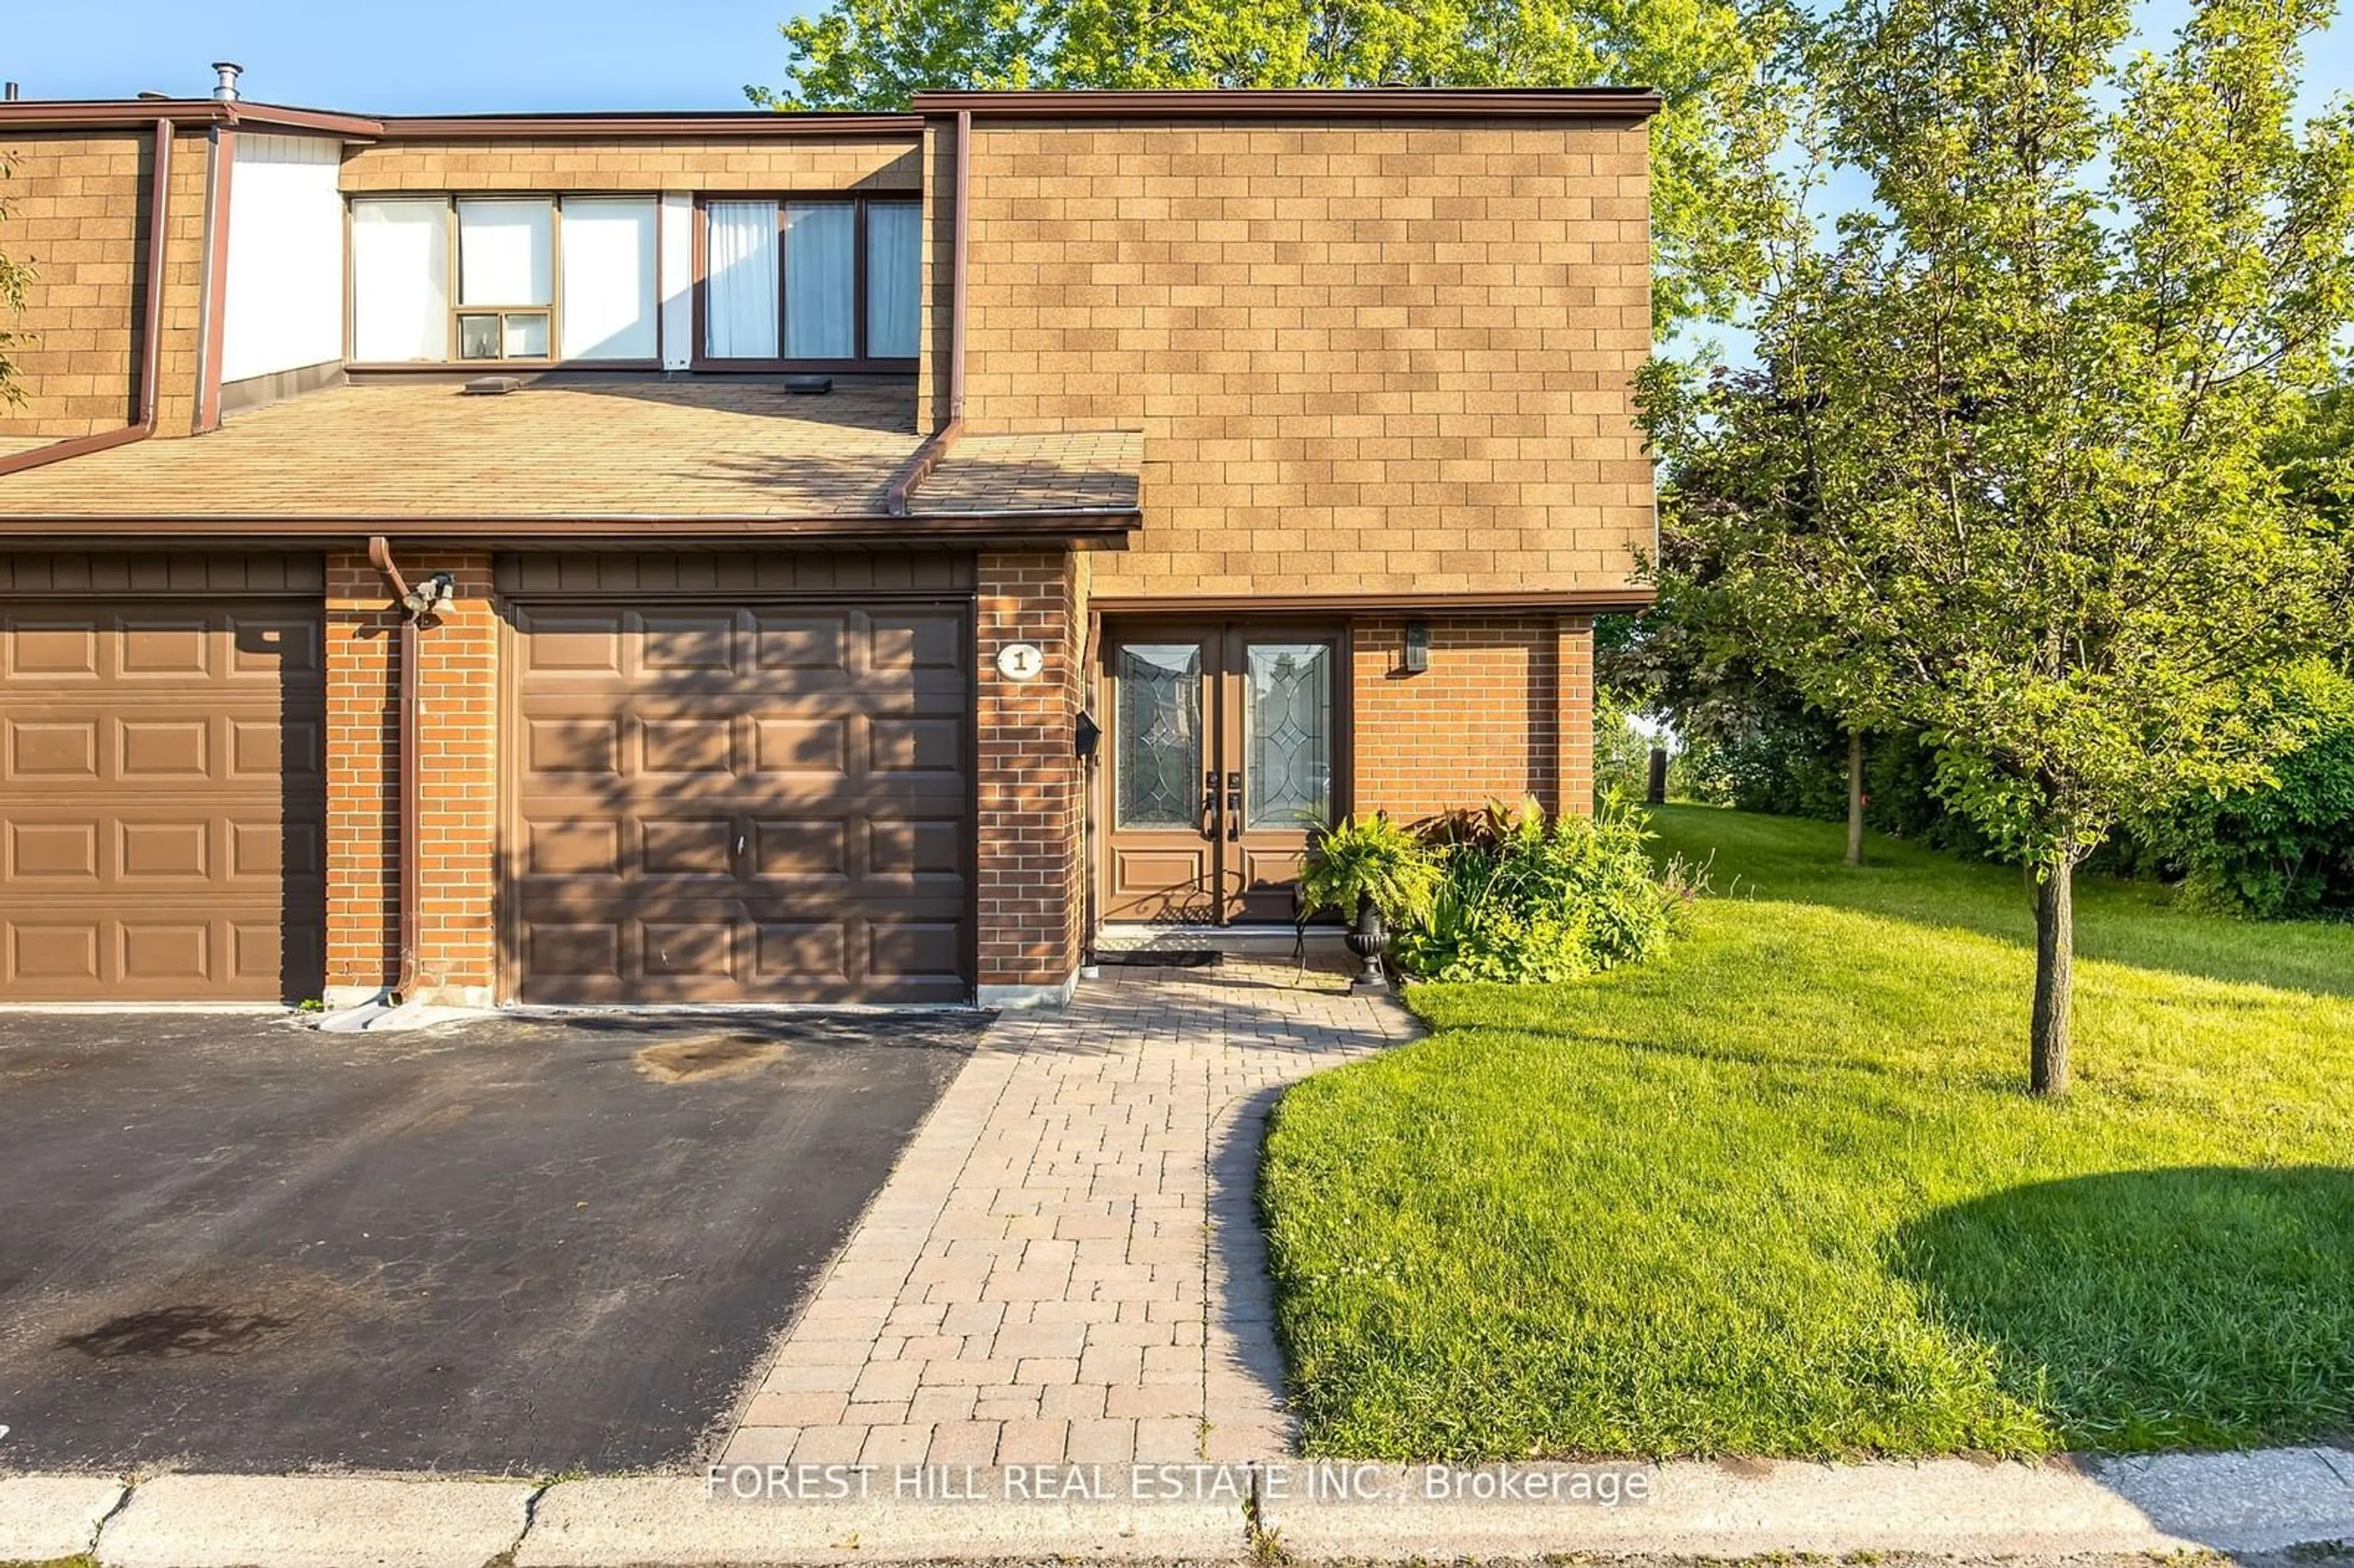 Home with brick exterior material for 600 Silver Creek Blvd #1, Mississauga Ontario L5A 2B4